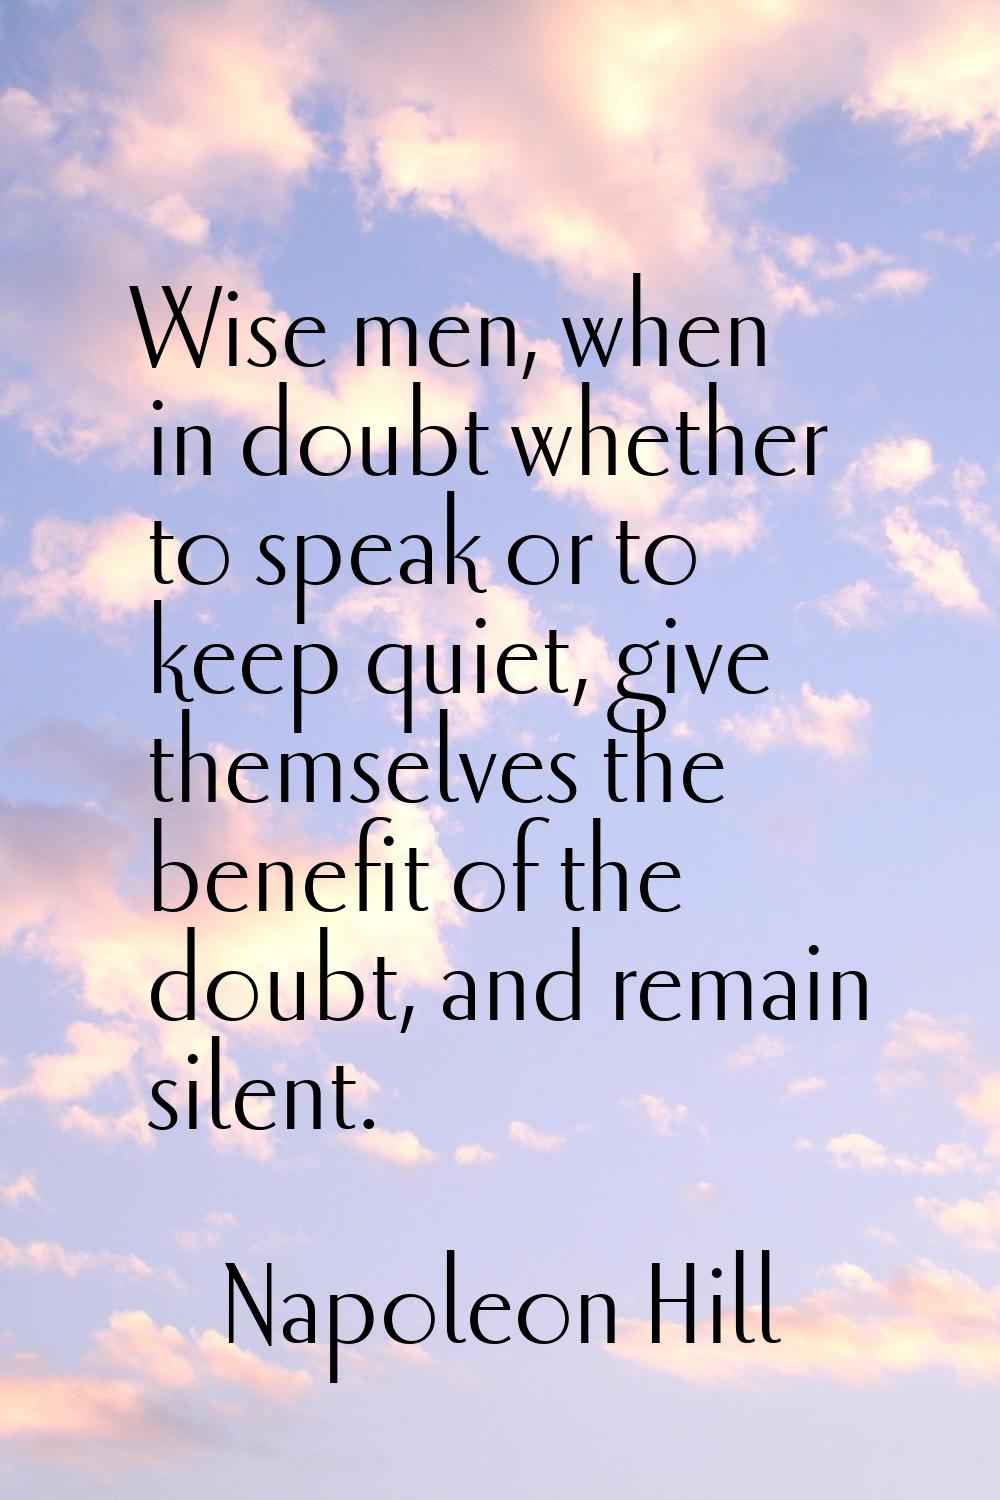 Wise men, when in doubt whether to speak or to keep quiet, give themselves the benefit of the doubt